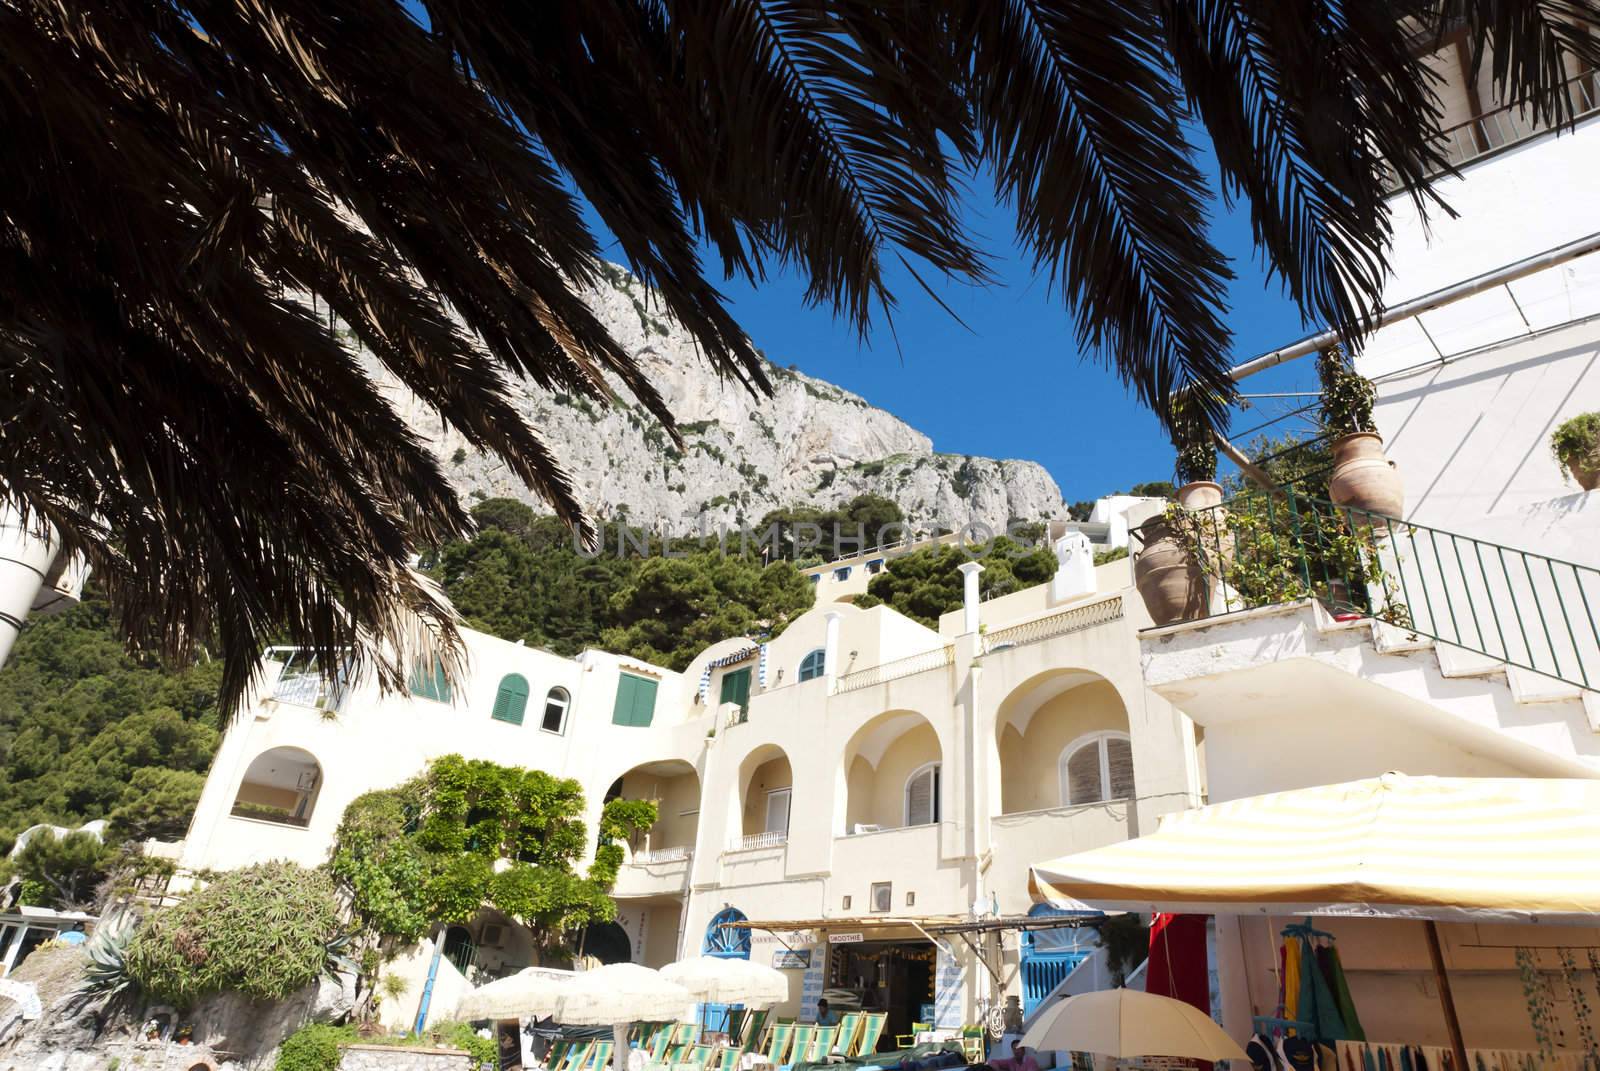 looking at building and cliffs under palm trees, marina piccollo capri italy by itsrich